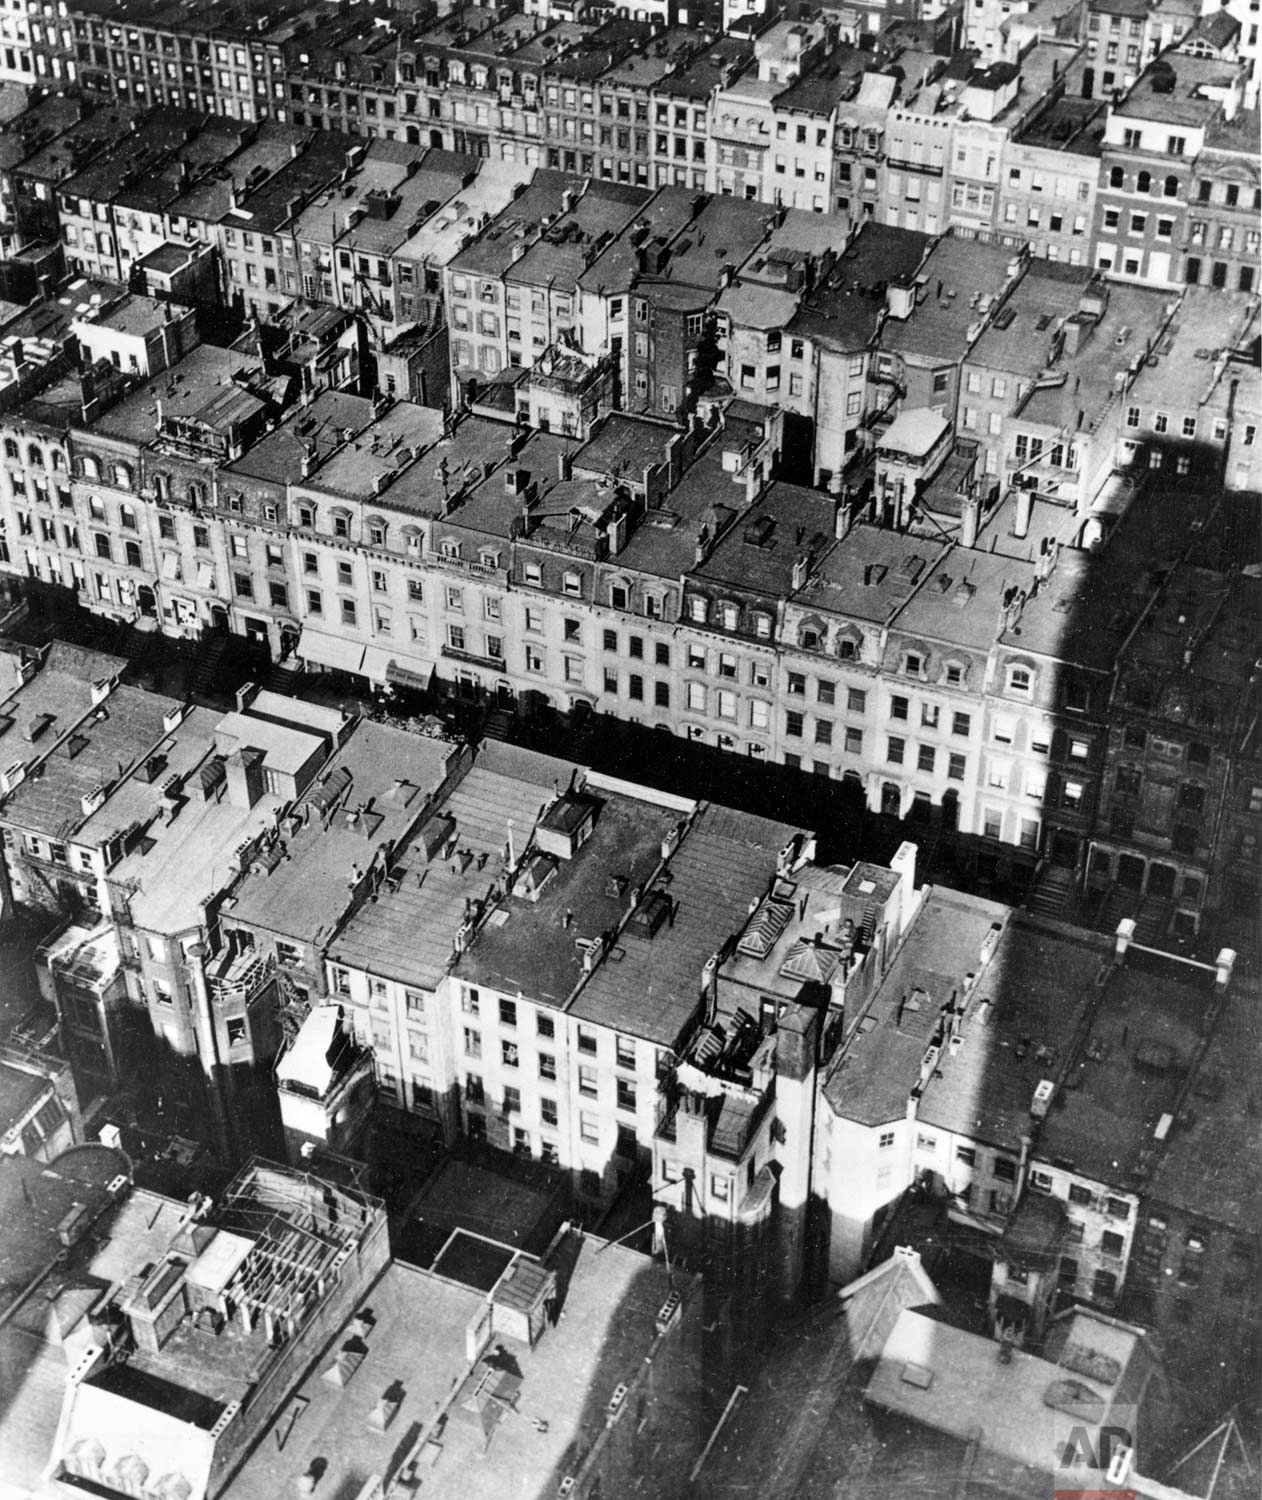  This aerial view shows the site of the projected Rockefeller Center in New York, prior to the beginning of demolition works, in June 1930. Two hundred and twenty-nine brownstone buildings are to be demolished in a three block area, stretching from W